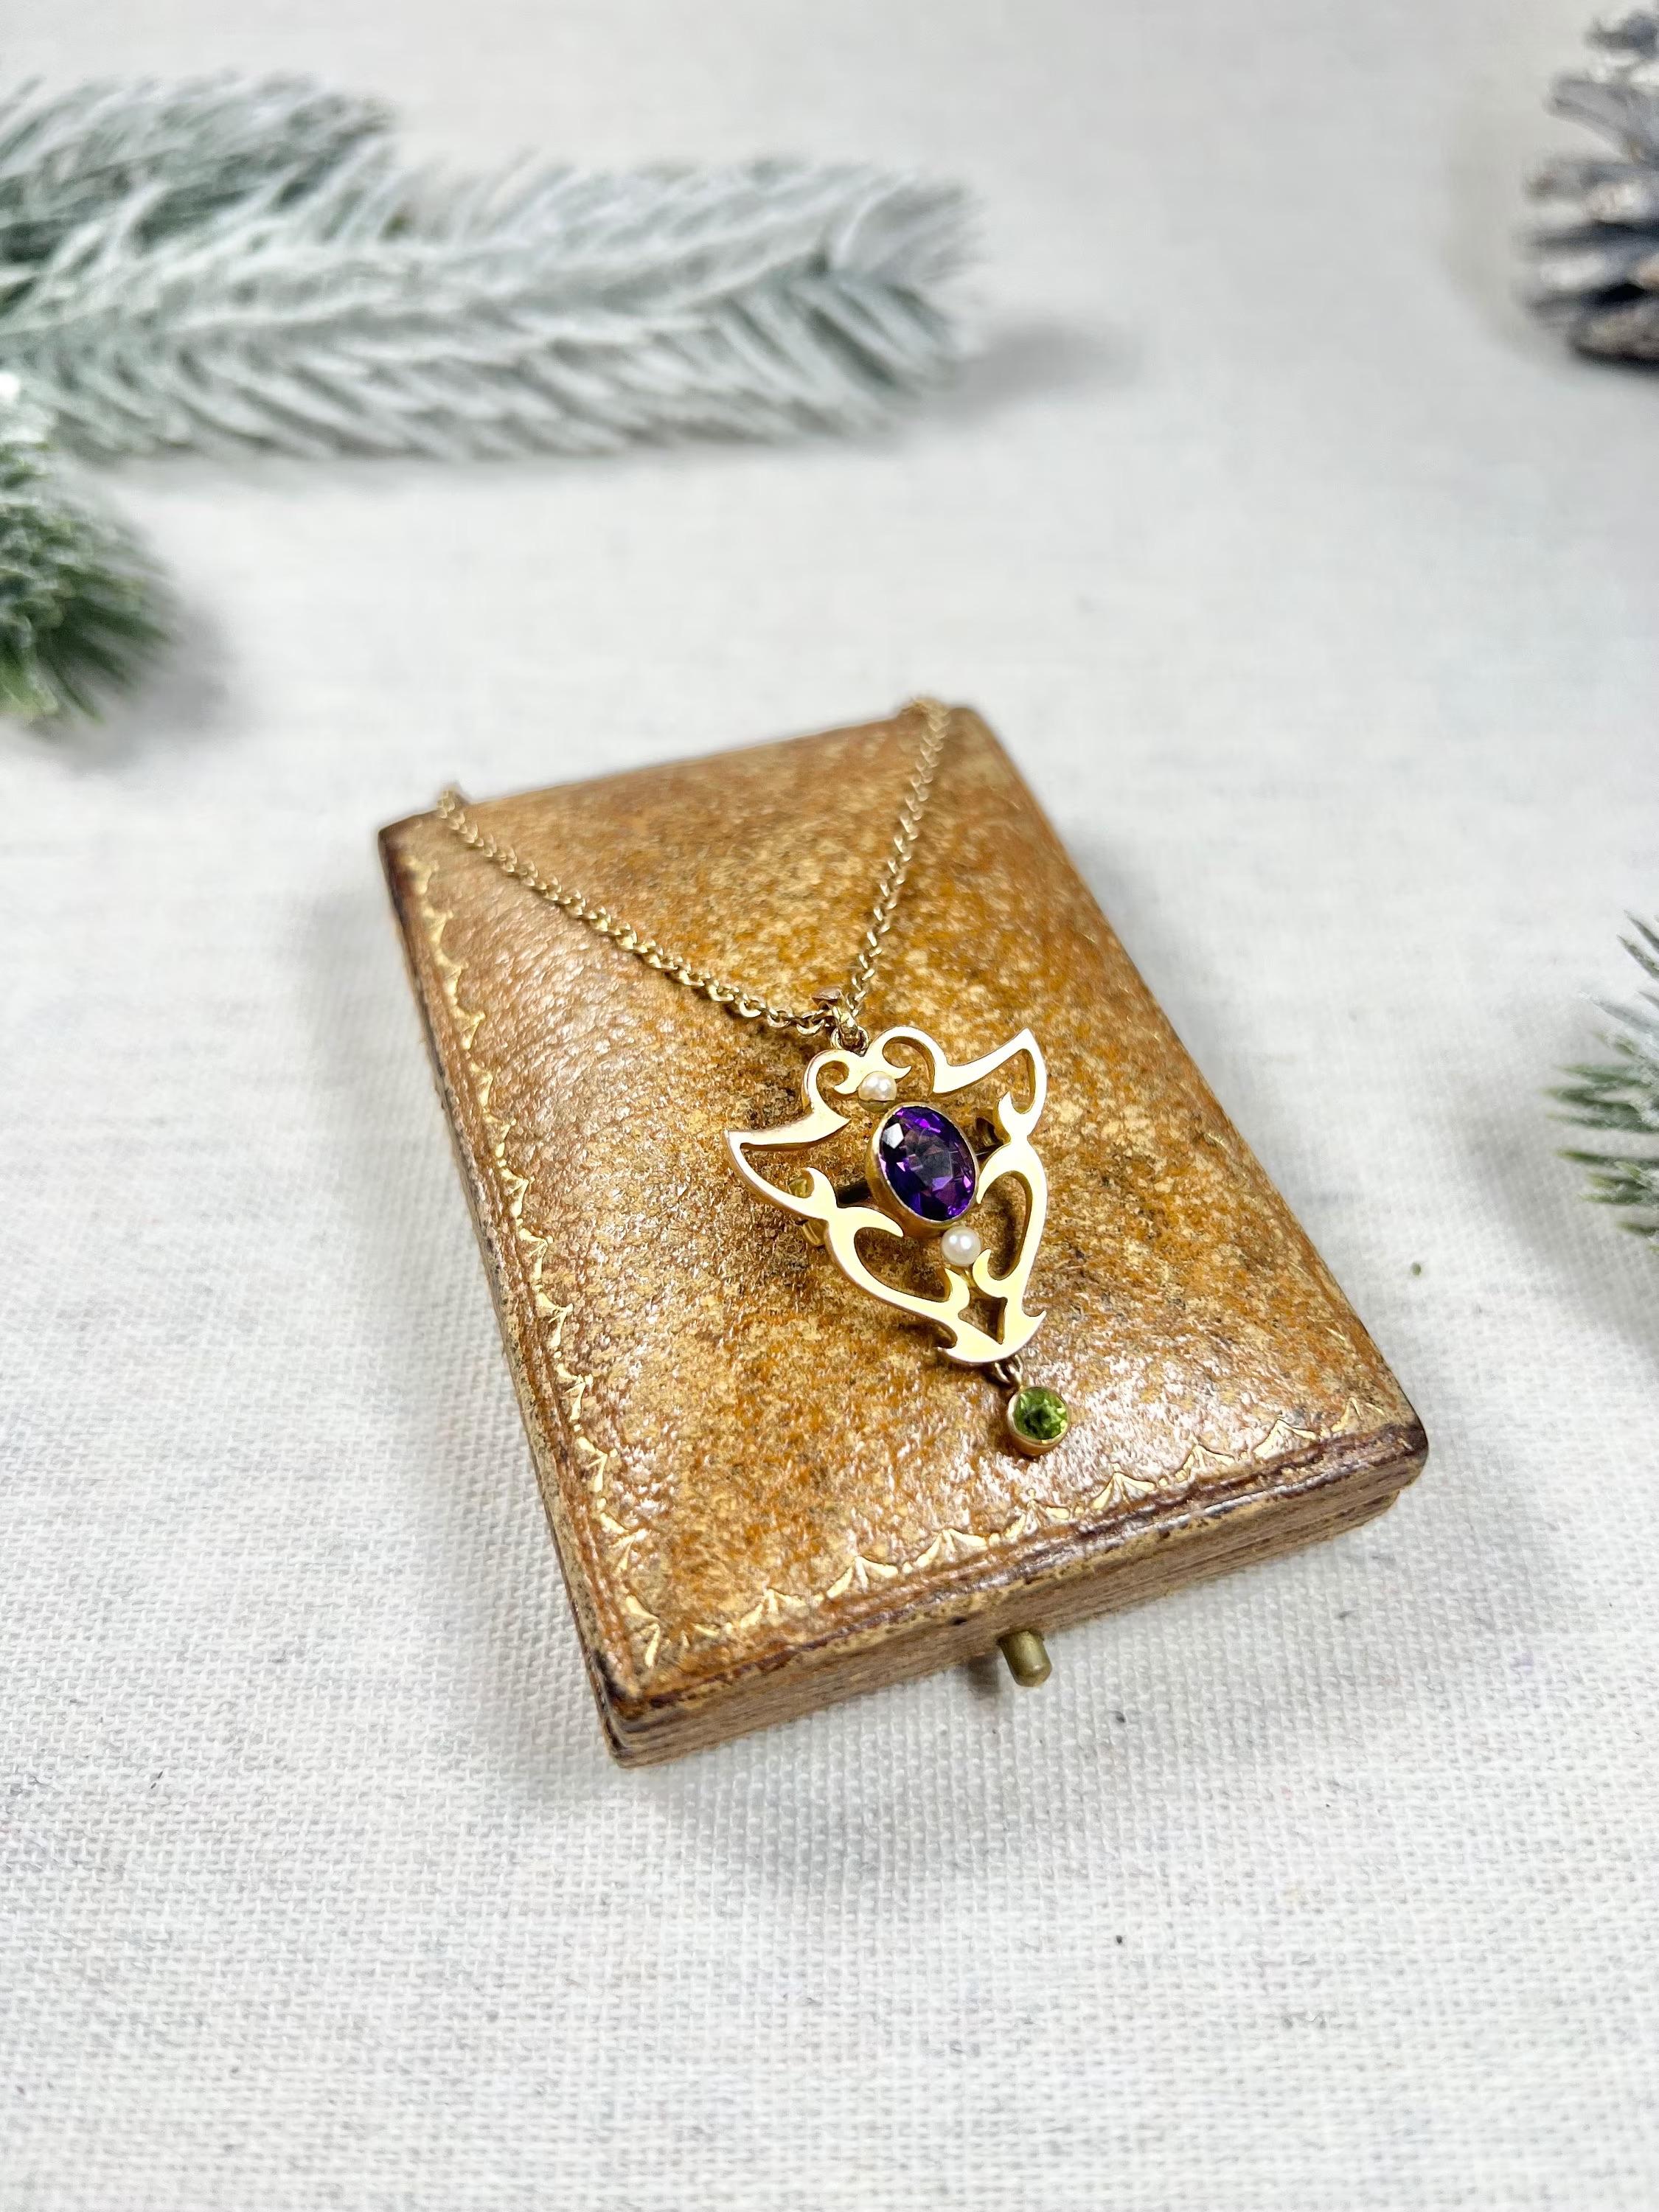 Antique 9ct Gold, Edwardian Amethyst, Pearl & Peridot Suffragette Pendant/Brooch For Sale 2